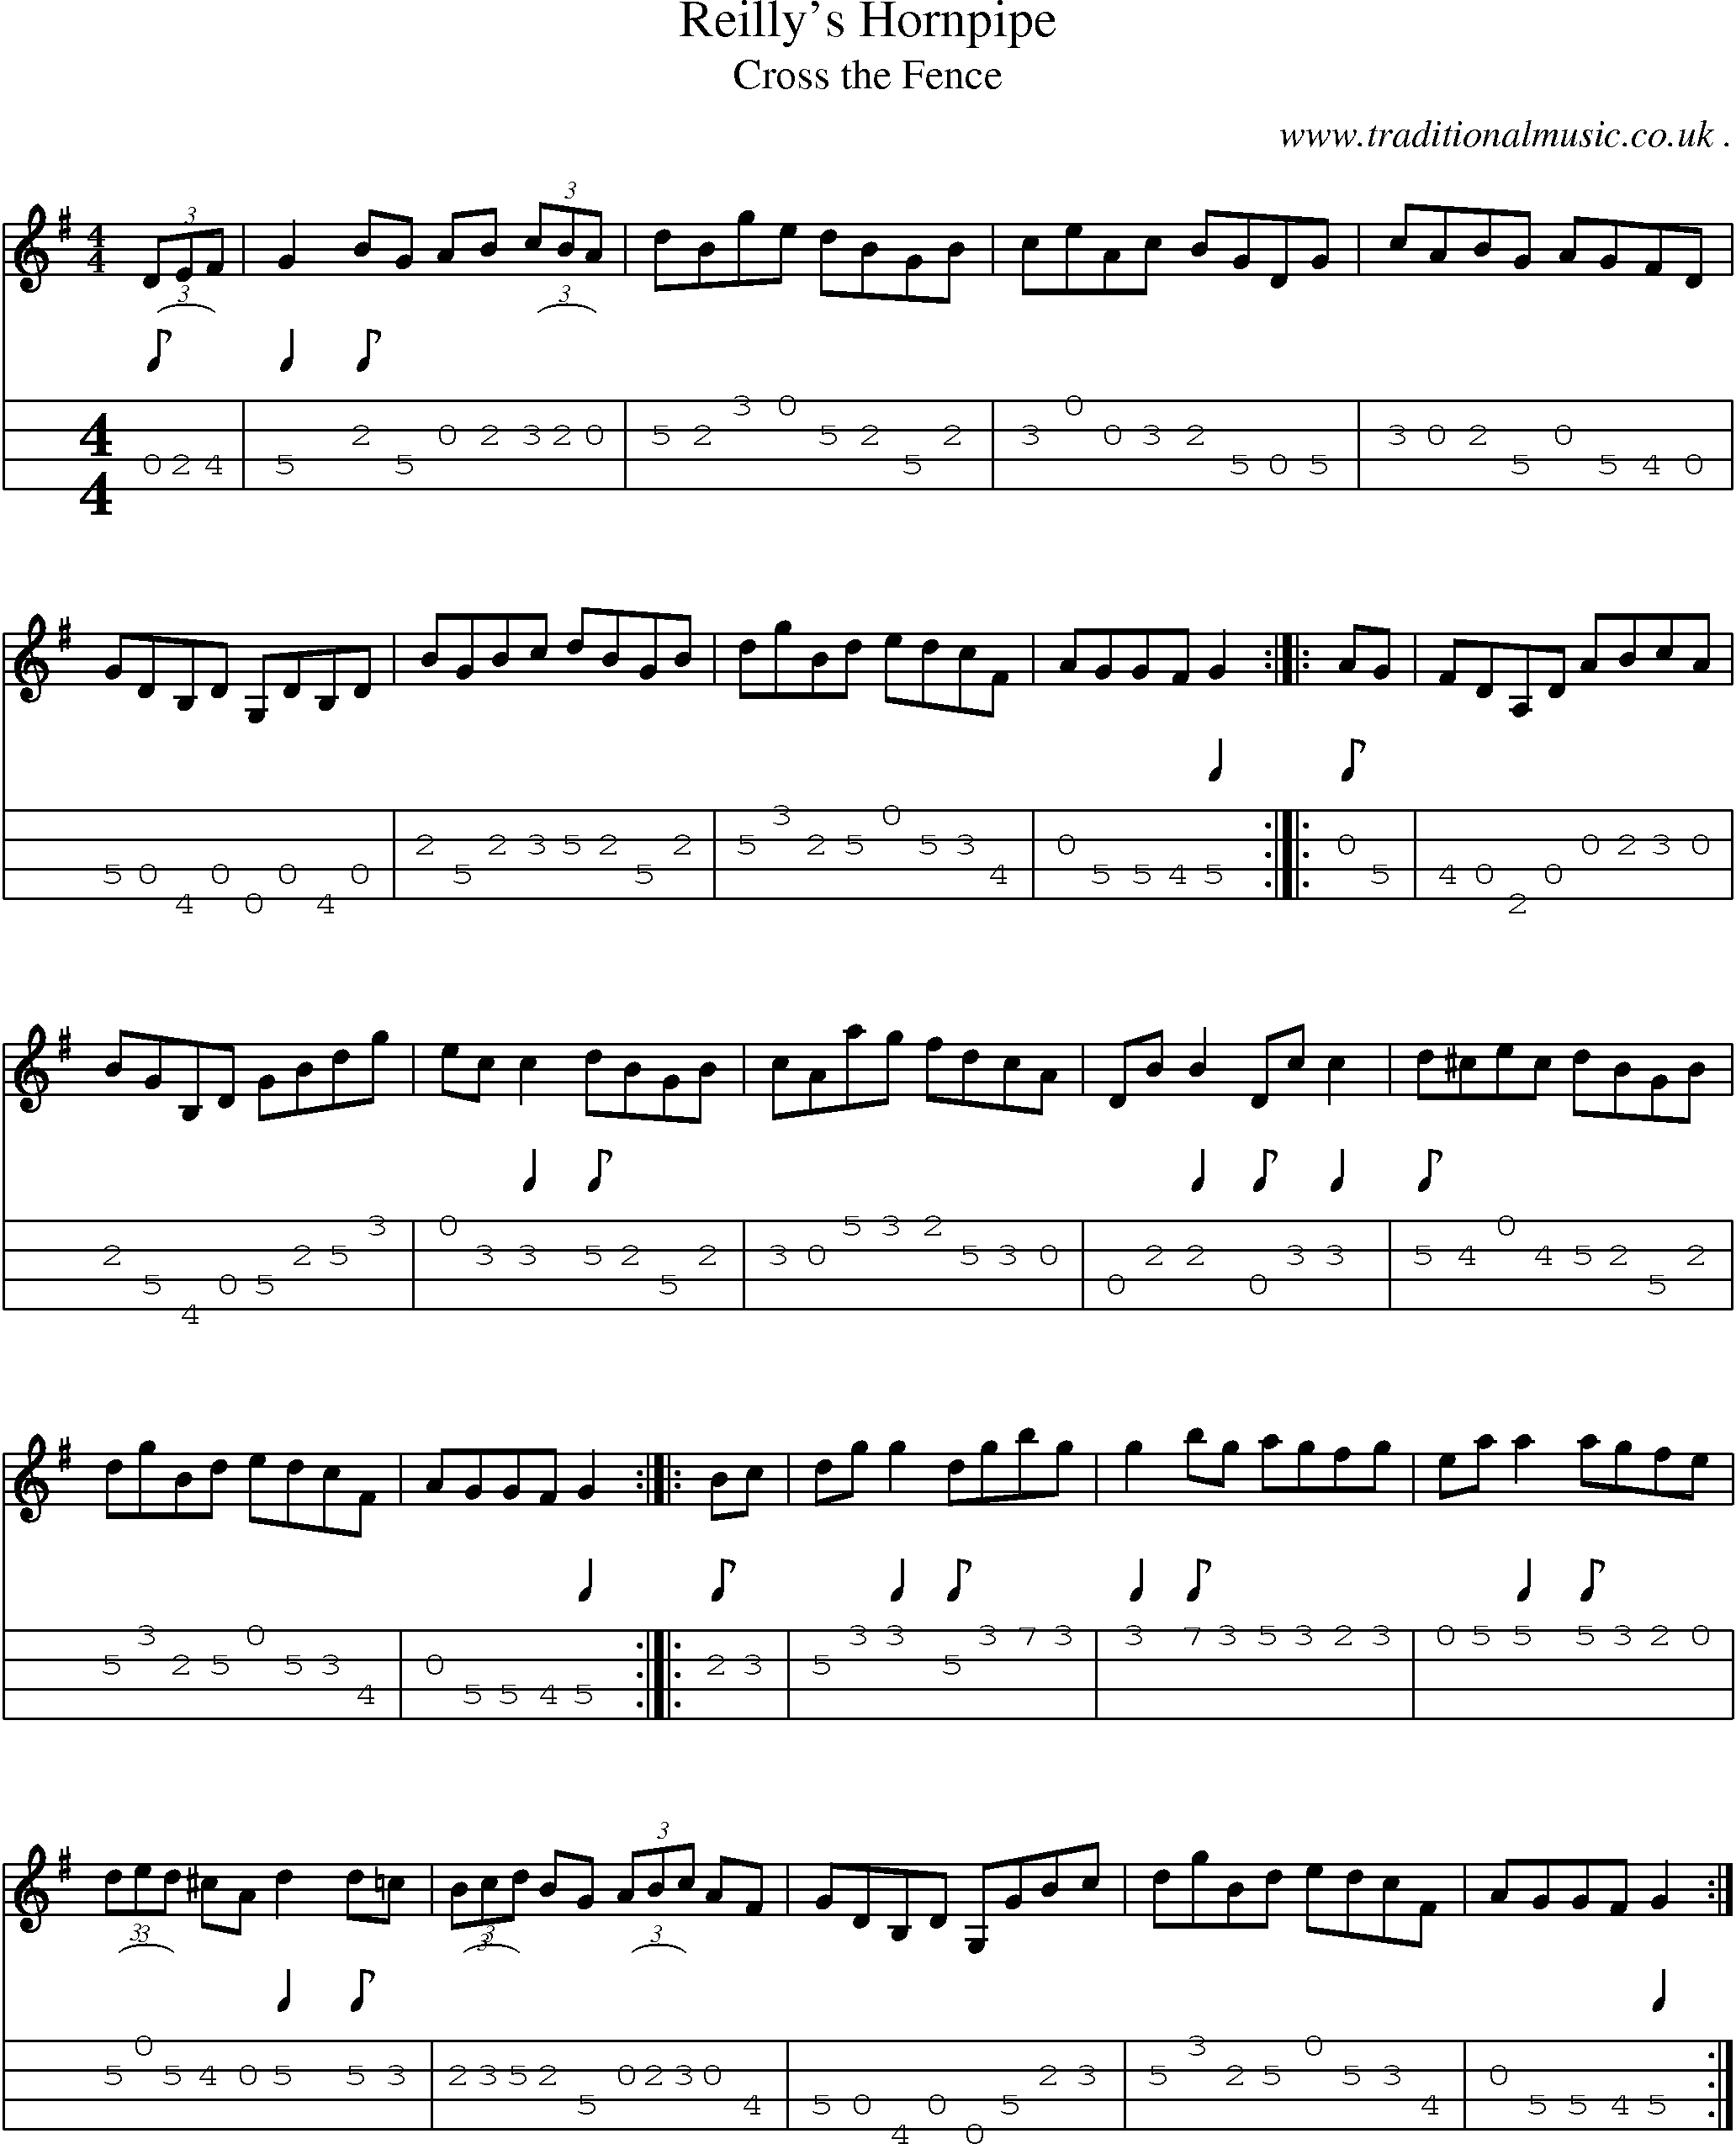 Sheet-Music and Mandolin Tabs for Reillys Hornpipe